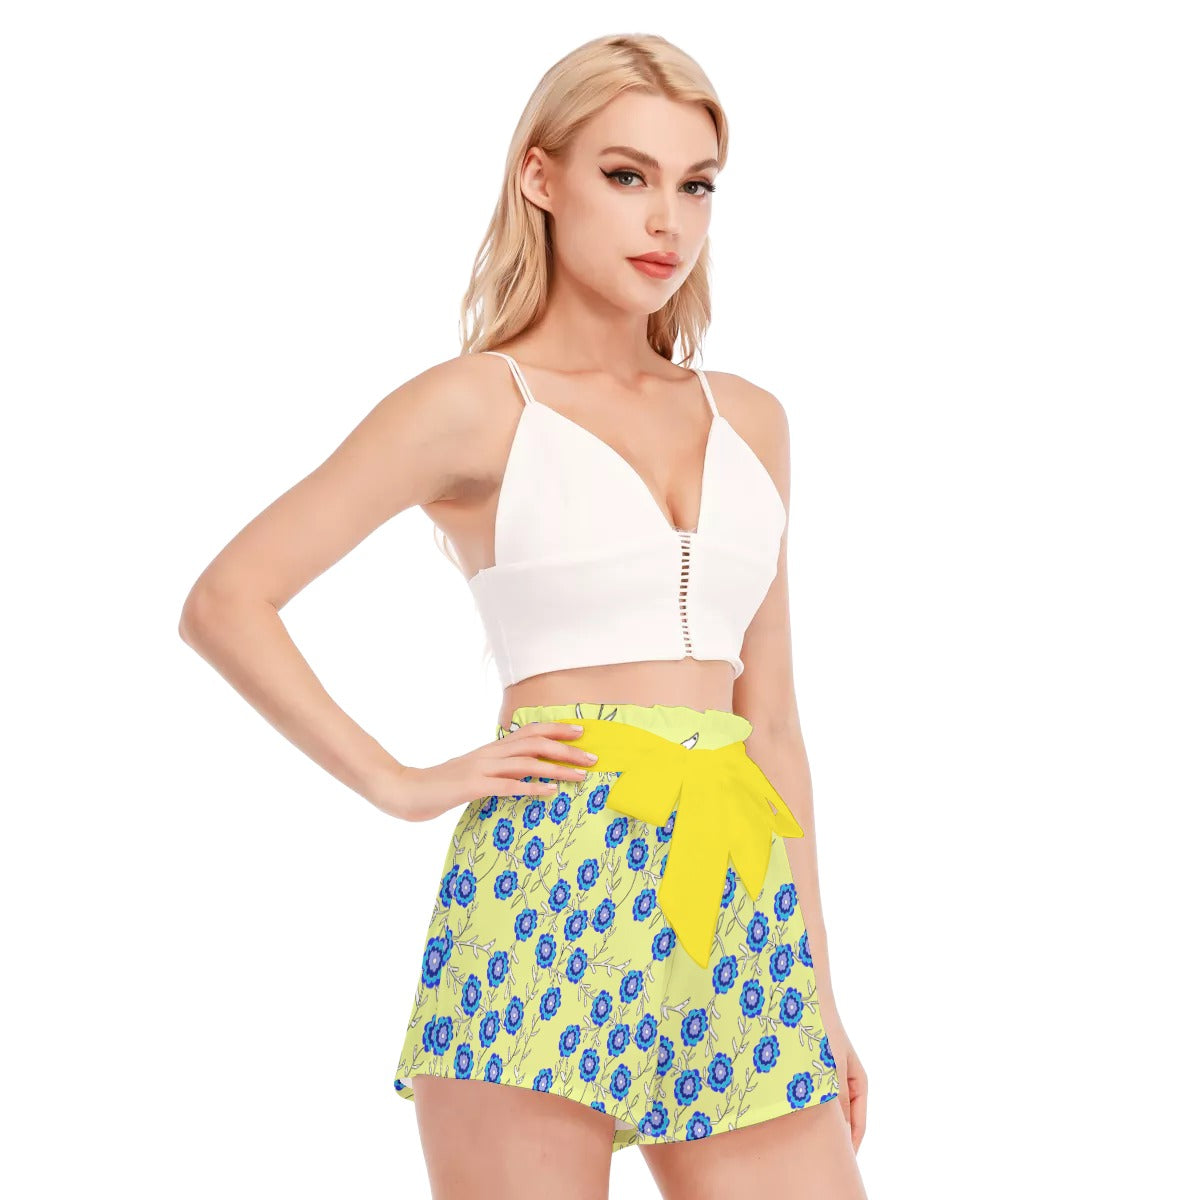 Blue Flowers On Yellow All-Over Print Women's Waist Shorts